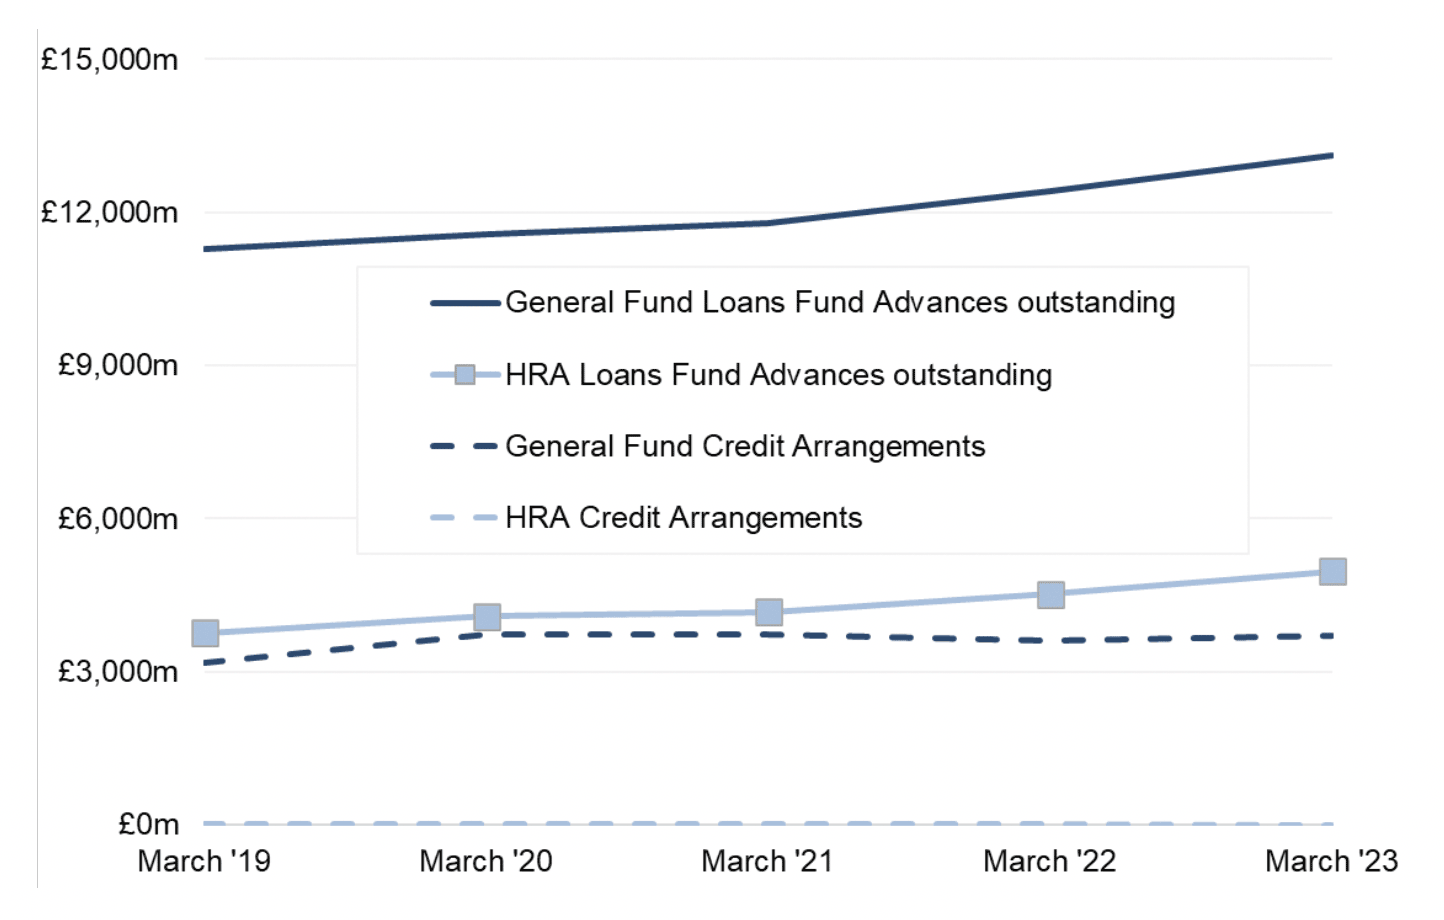 Line chart shows total debt at 31 March 2019 to 31 March 2023 by type of debt and split by General Fund and HRA. Total debt has increased by 19.6 per cent, or £3,577 million, over this five-year period. The split of total debt across the four categories shown has remained fairly consistent across this period with General Fund borrowing accounting for around three-fifths of total debt; HRA borrowing accounting for just over one-fifth; and General Fund credit arrangements accounting for just under one-fifth of total debt.